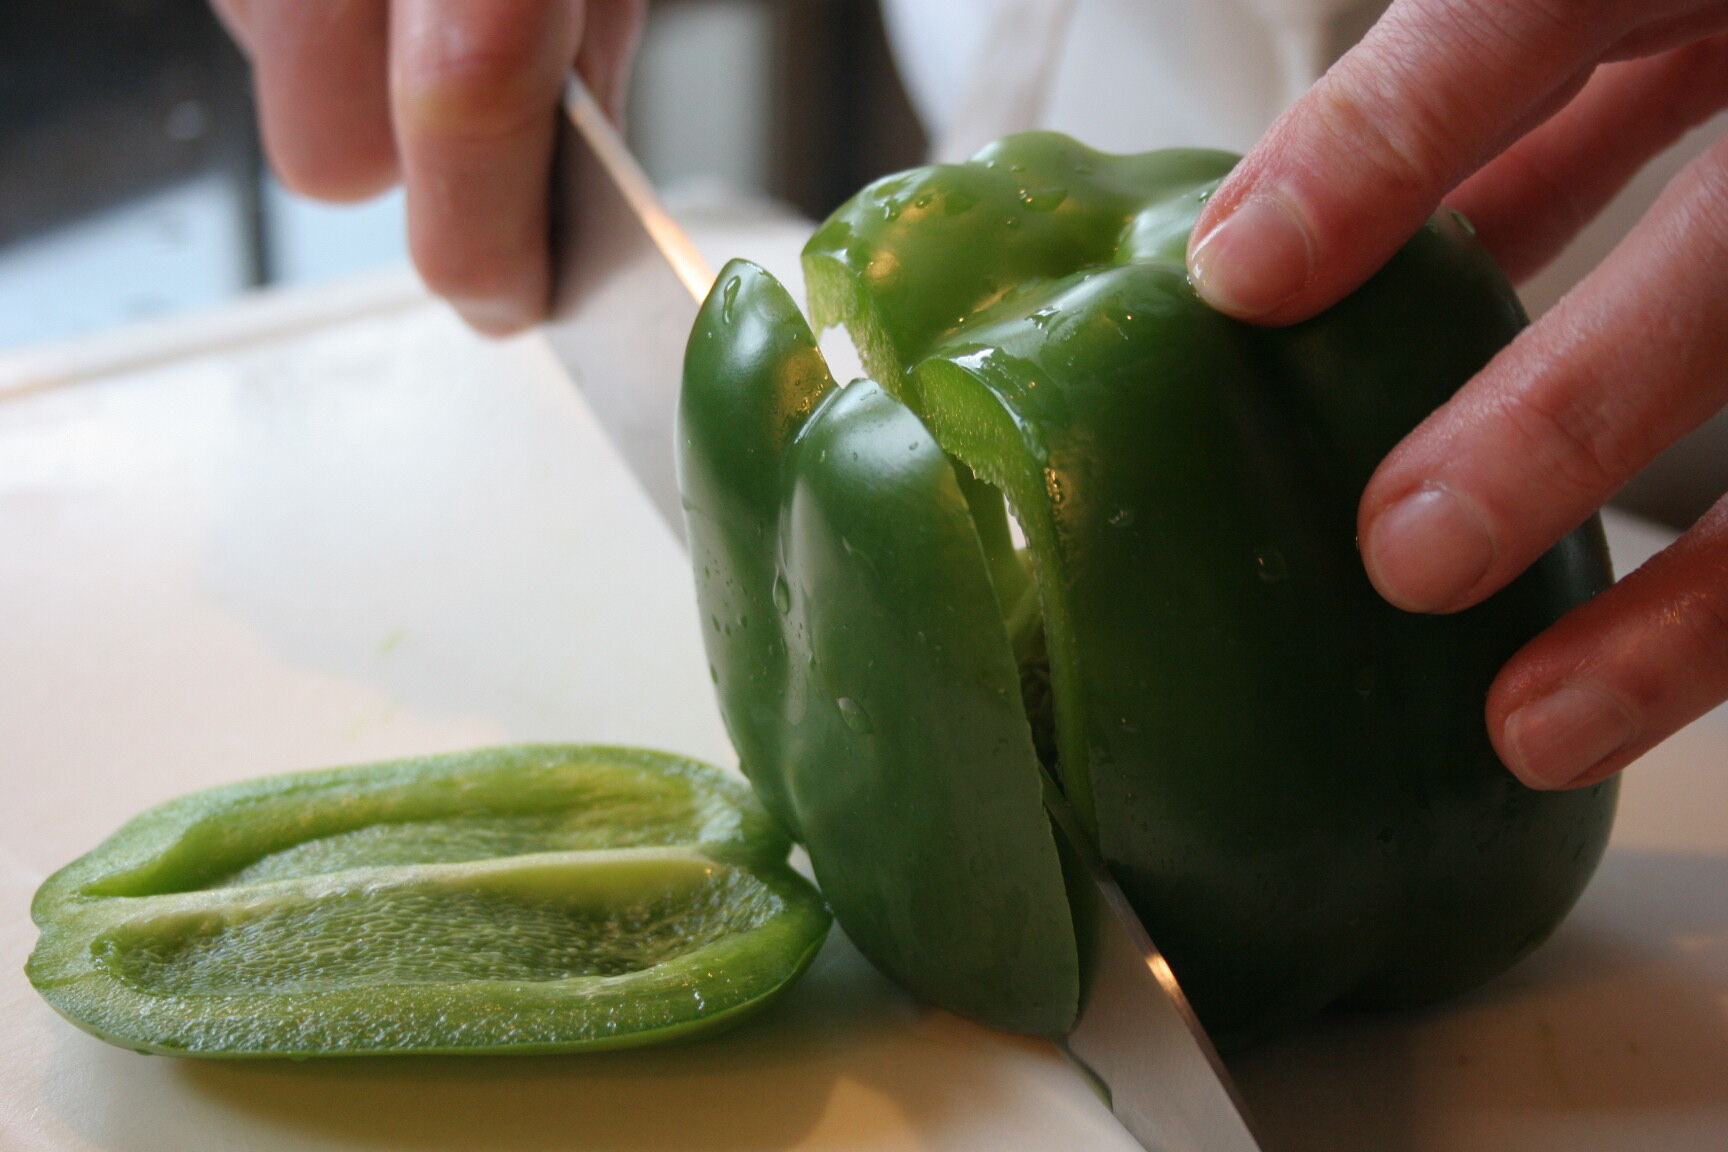 knife-skills-how-to-cut-a-bell-pepper